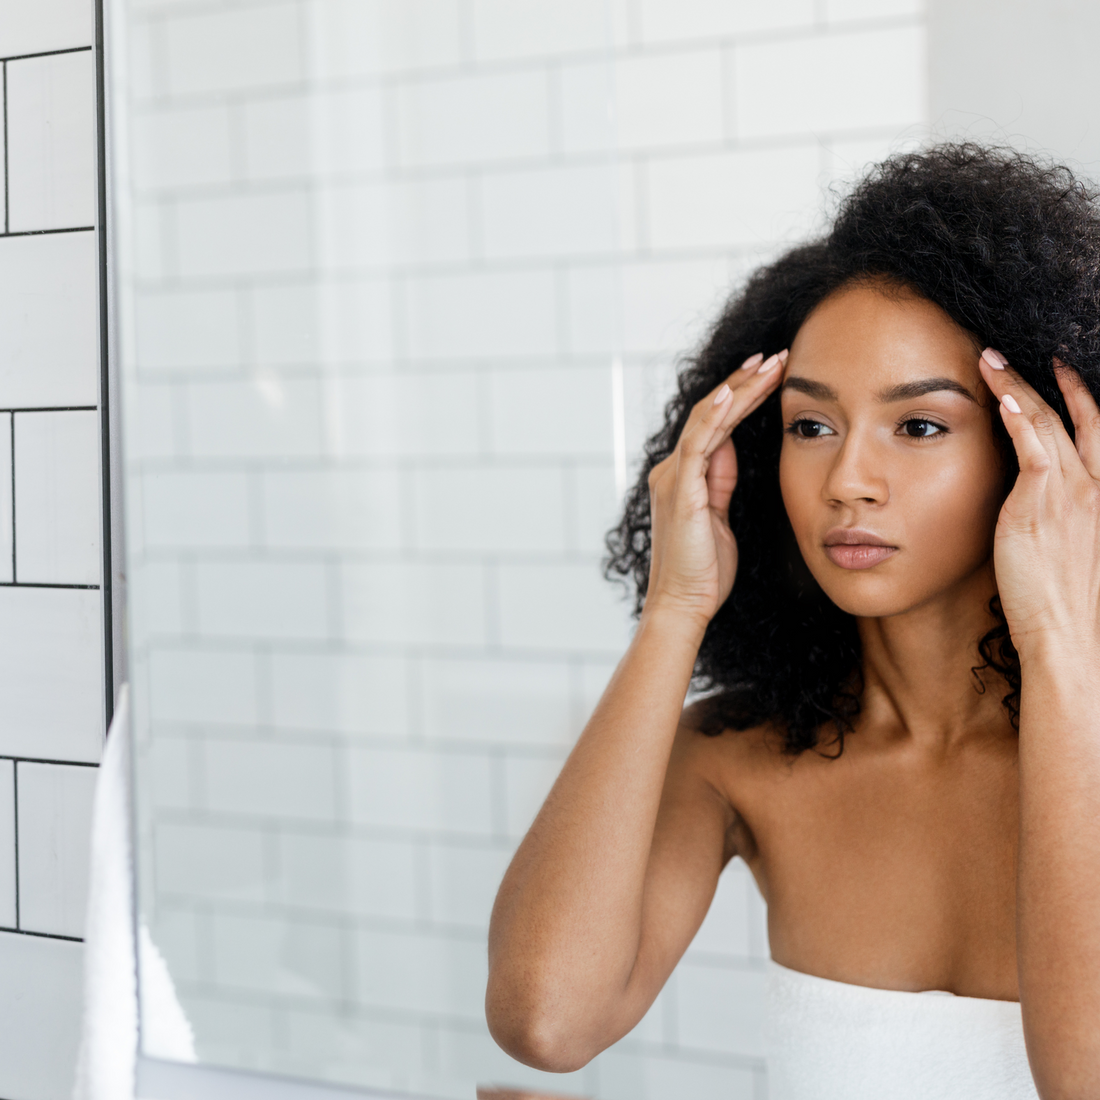 The Top 5 Skincare Myths You Should Stop Believing